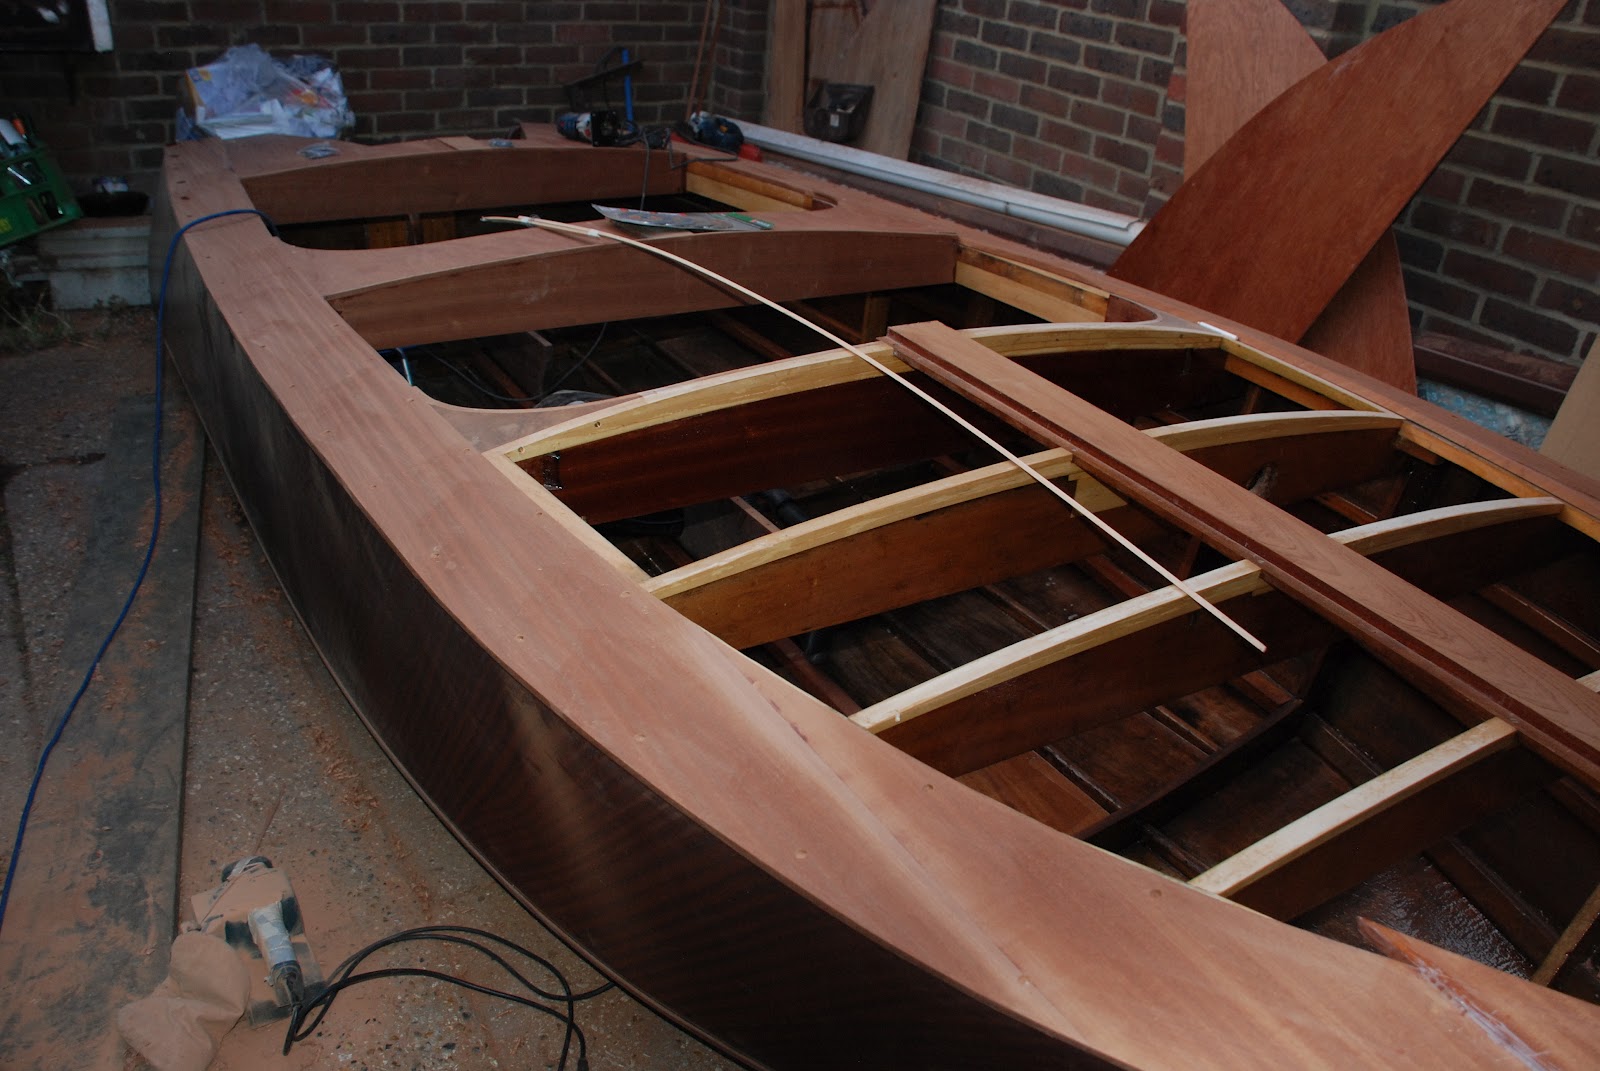 my wooden speed boat build: coverboards